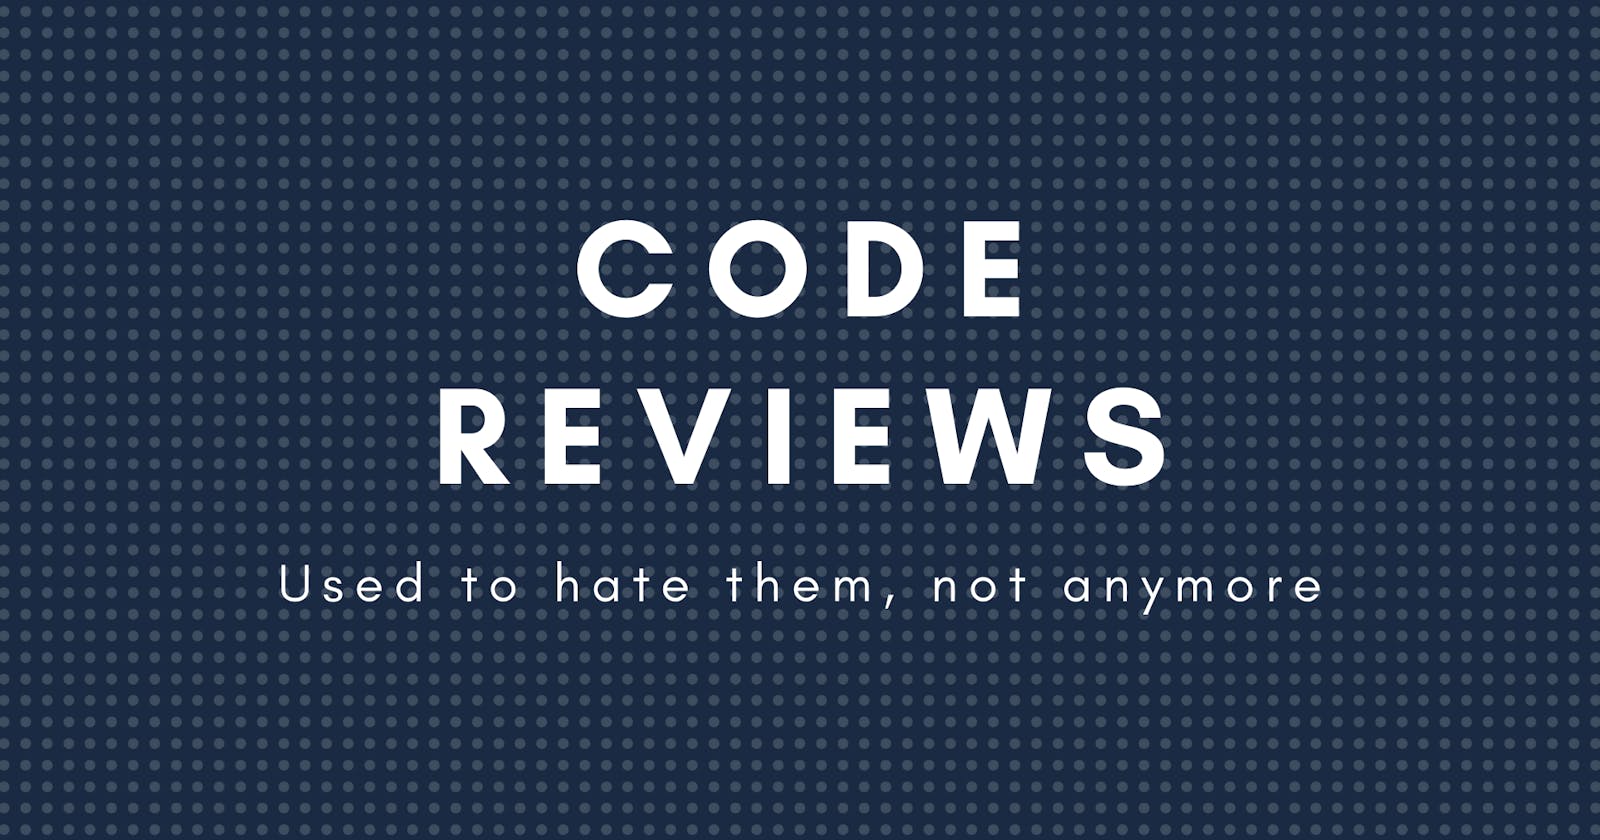 Code reviews - Used to hate them, not anymore